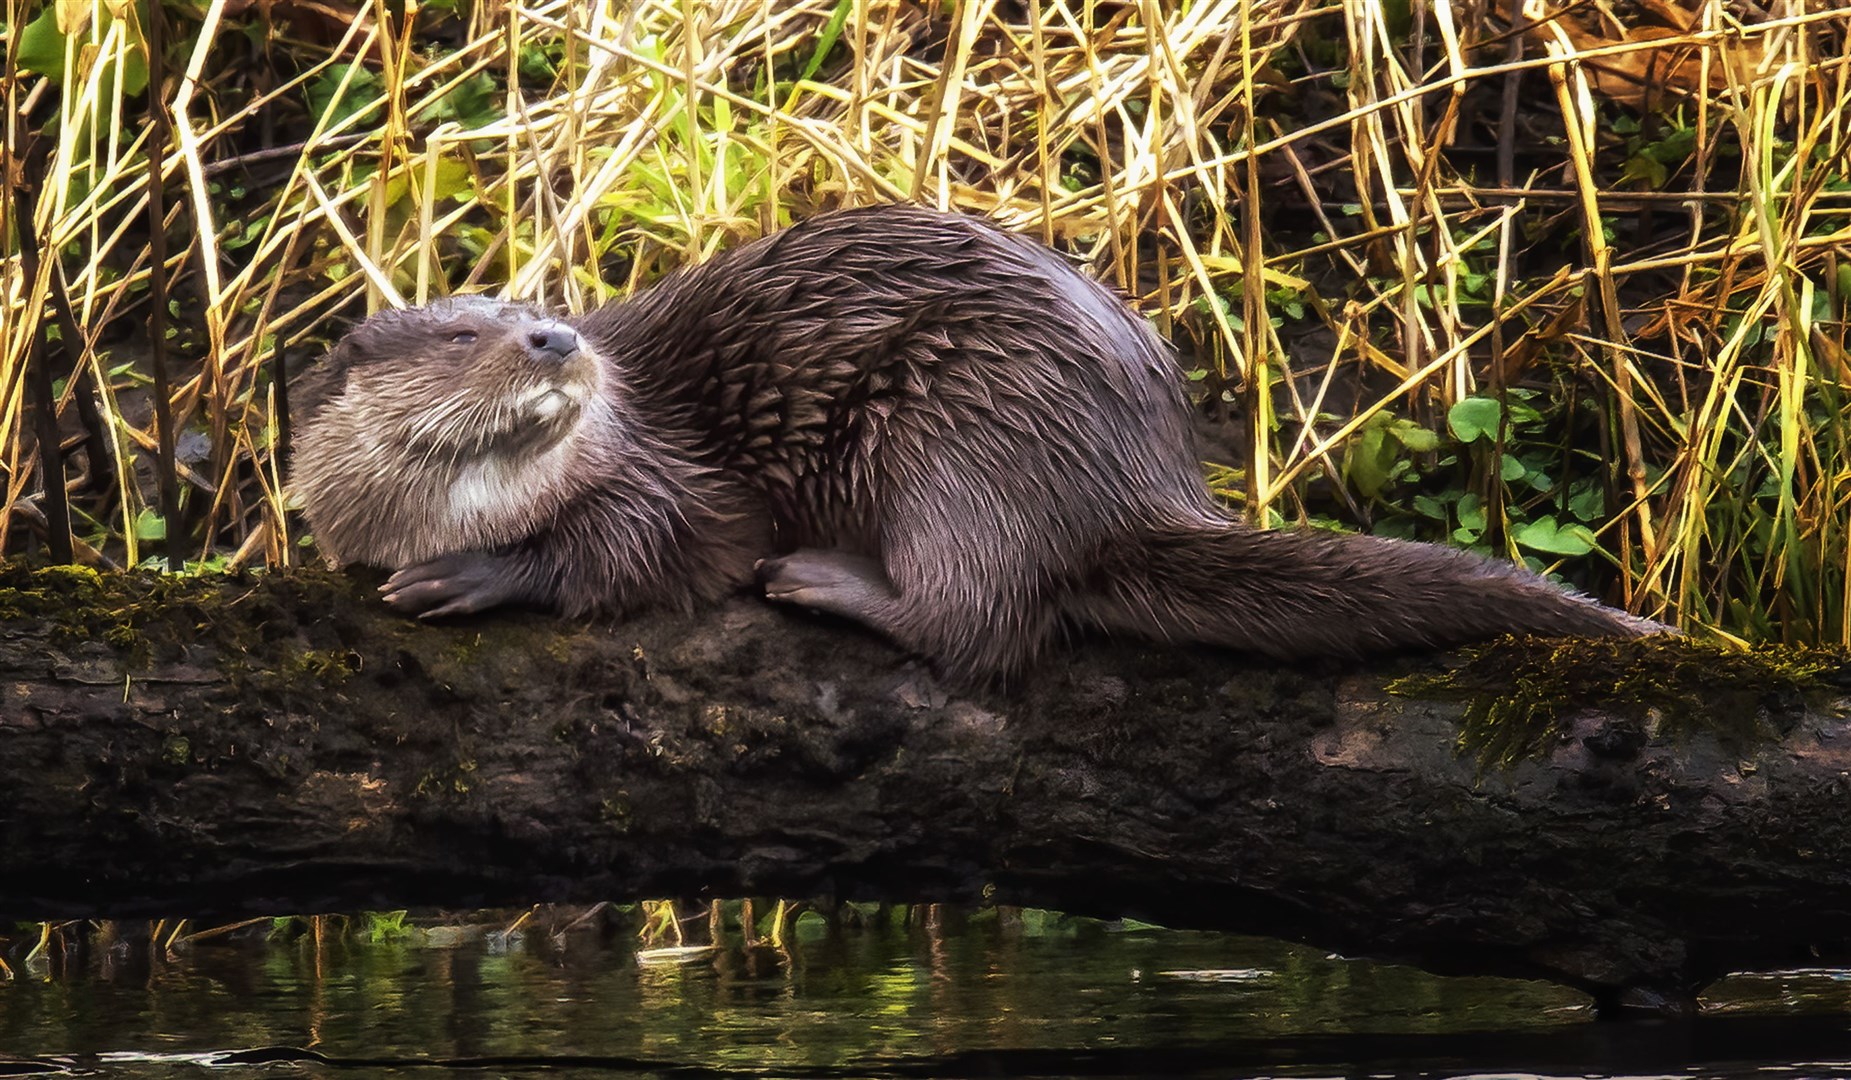 Potential impact on otters is one of the concerns highlighted.